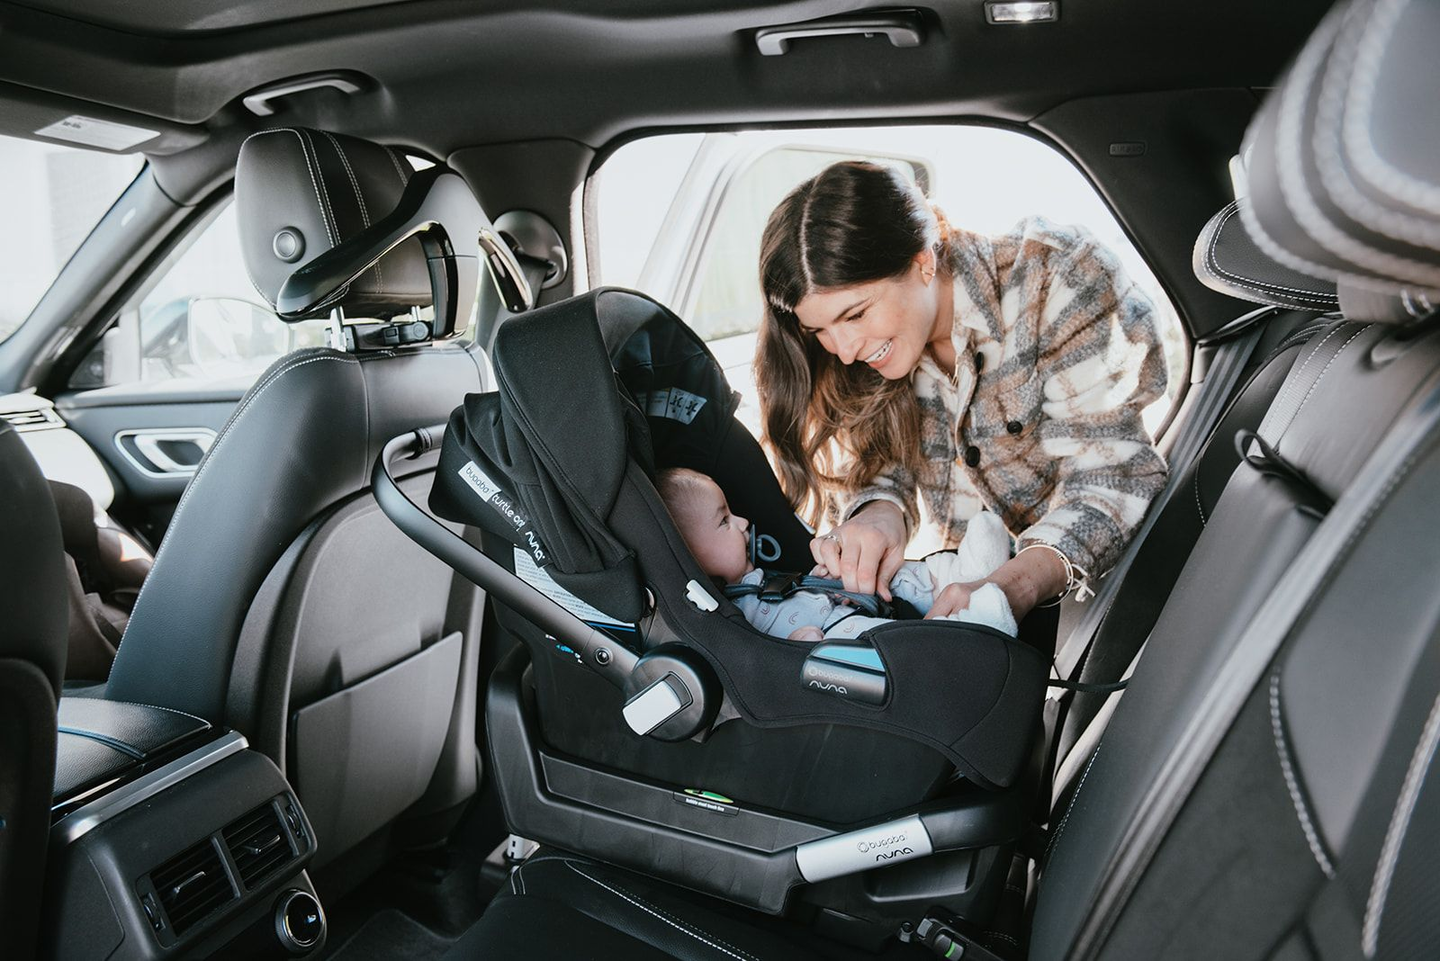 How to Clean a Baby Car Seat